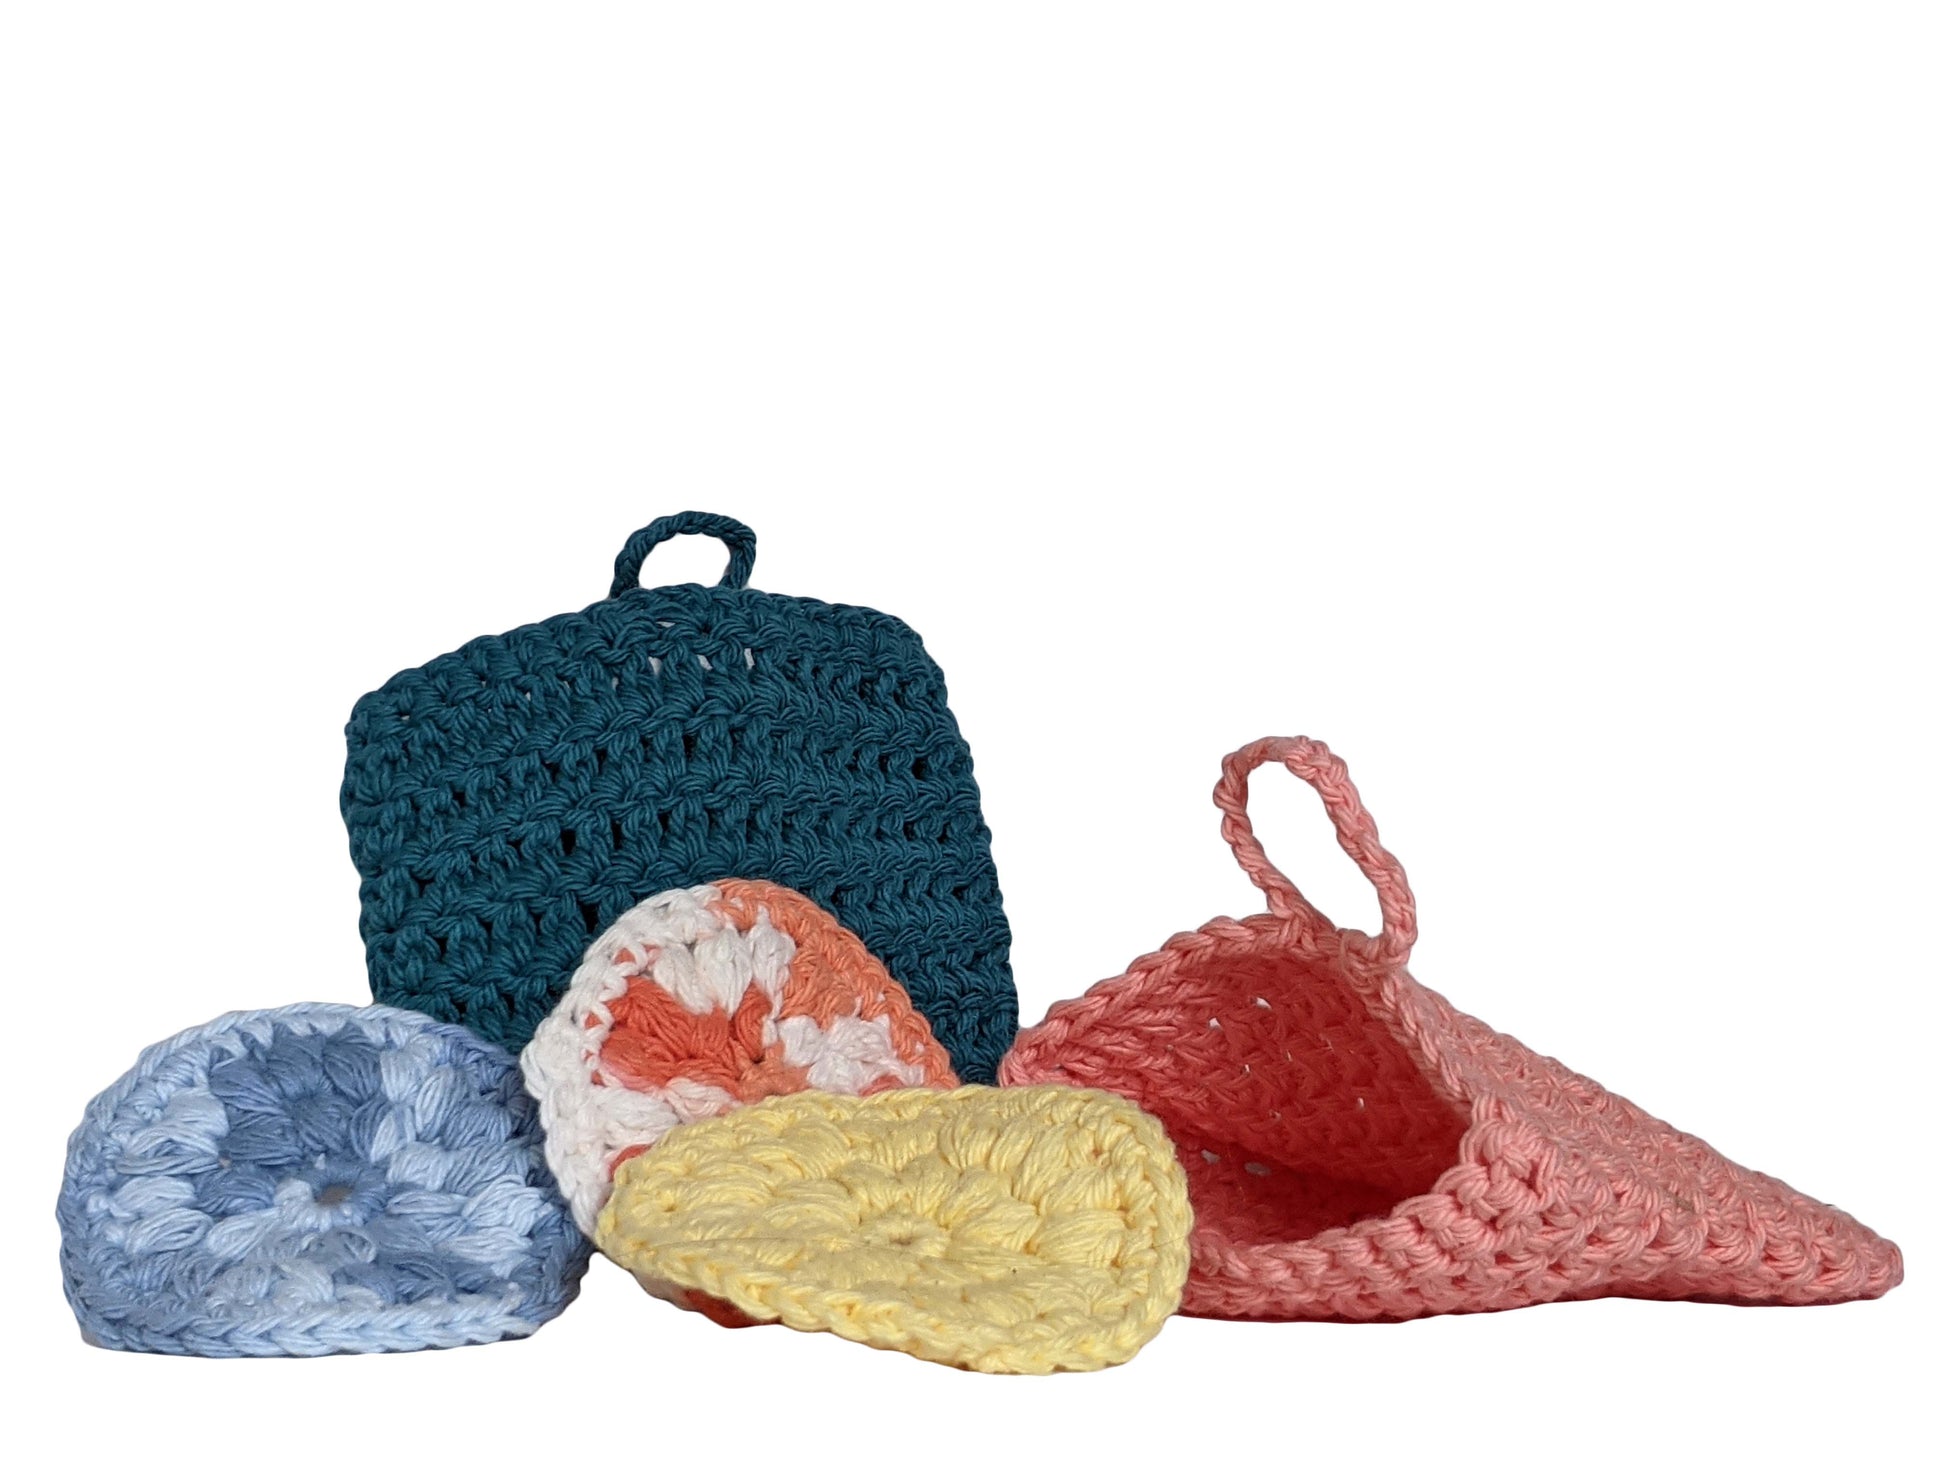 Crocheted Soap Saver Cozie | By Robin Creations 